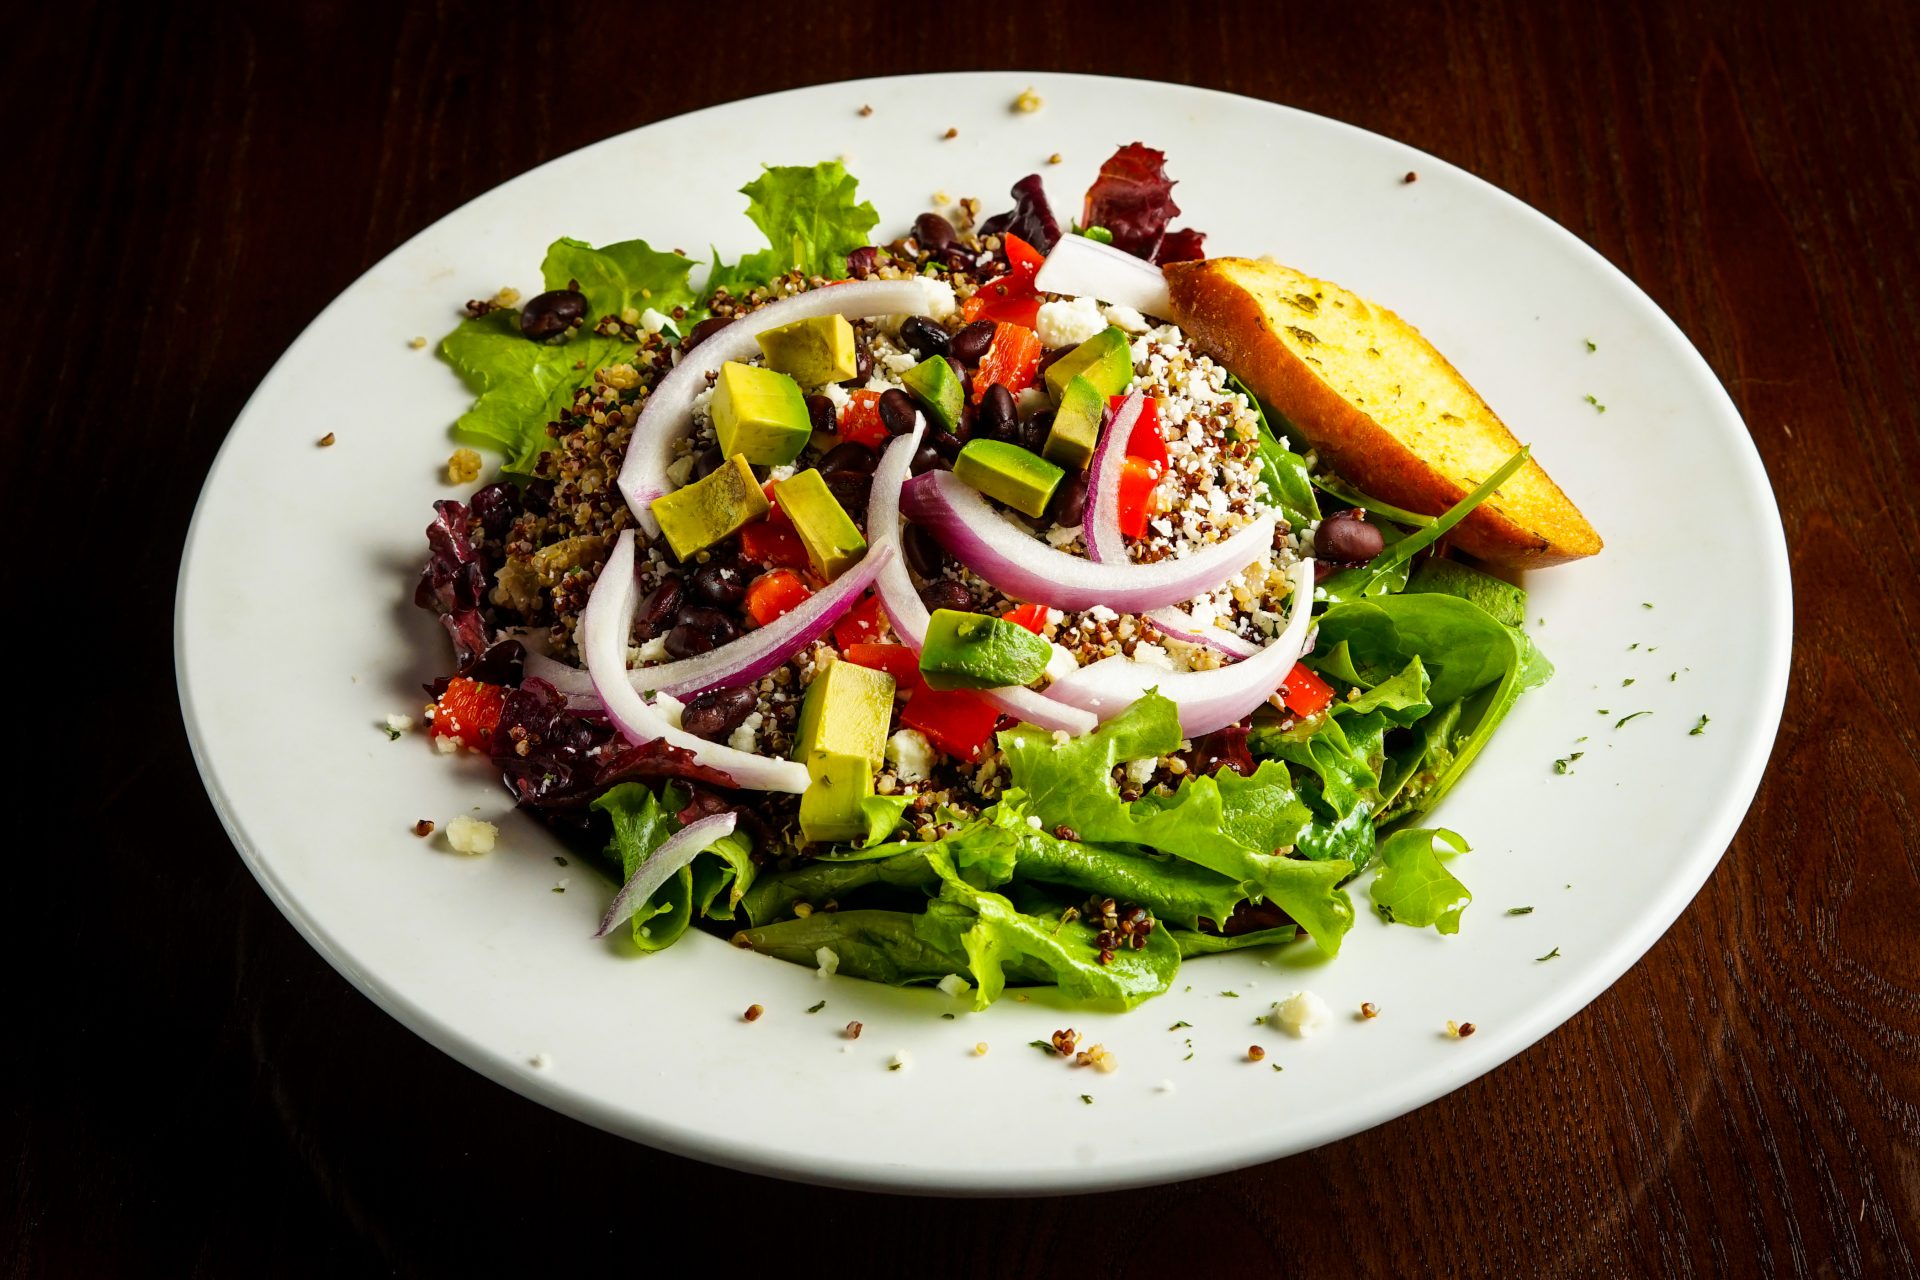 Image of Quinoa Salad - Red & White Quinoa, Mixed Greens, Avocado, Red Onion. Black Beans, Red Peppers, Queso Fresco, Champagne Vinaigrette